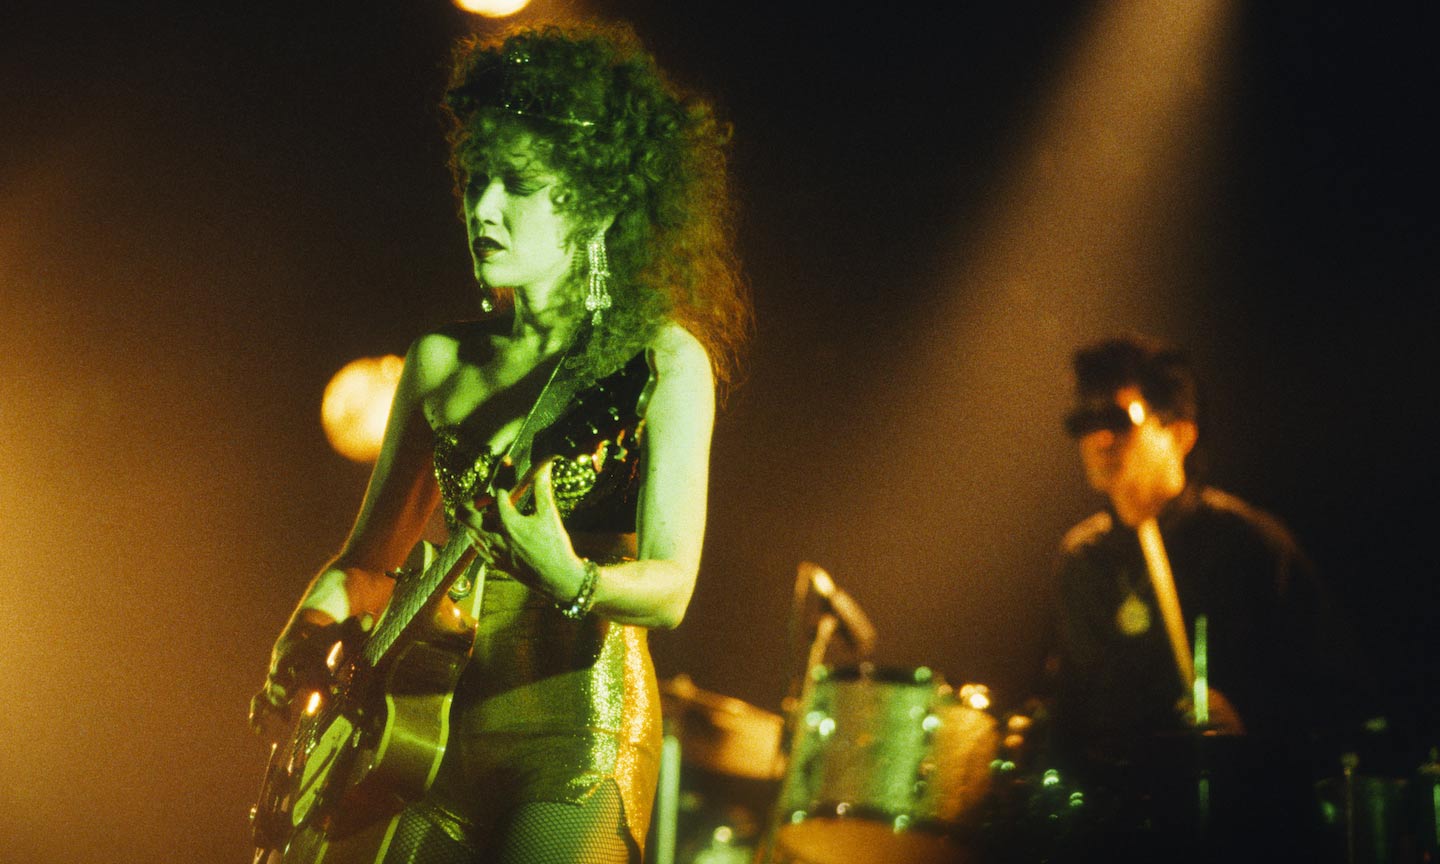 Best Female Guitarists: An Essential Top 25 Countdown